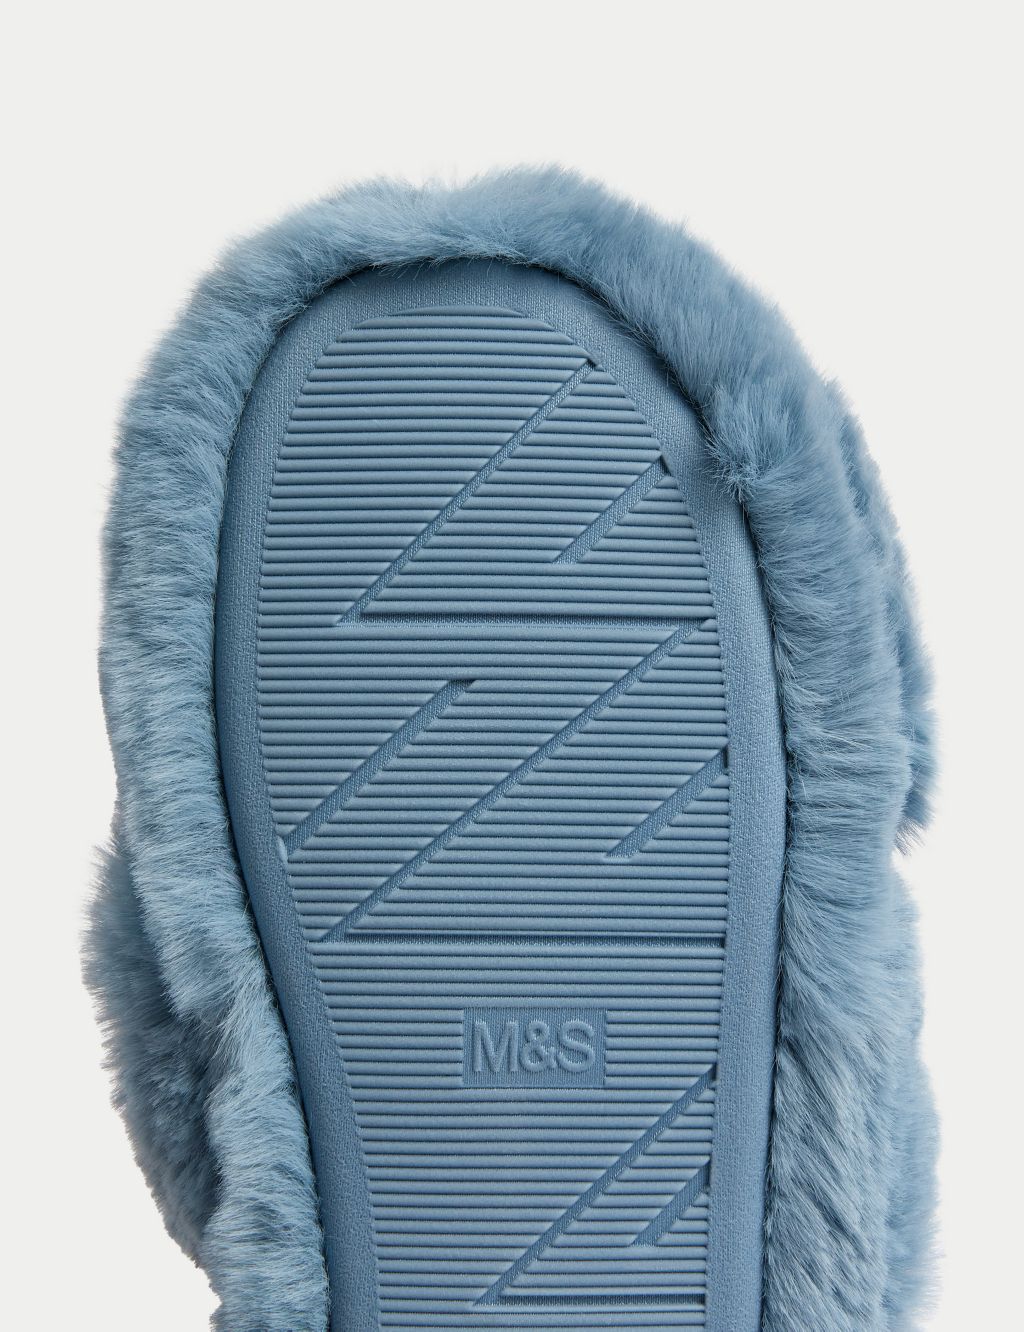 Kids' Faux Fur Slippers (13 Small - 6 Large) image 4